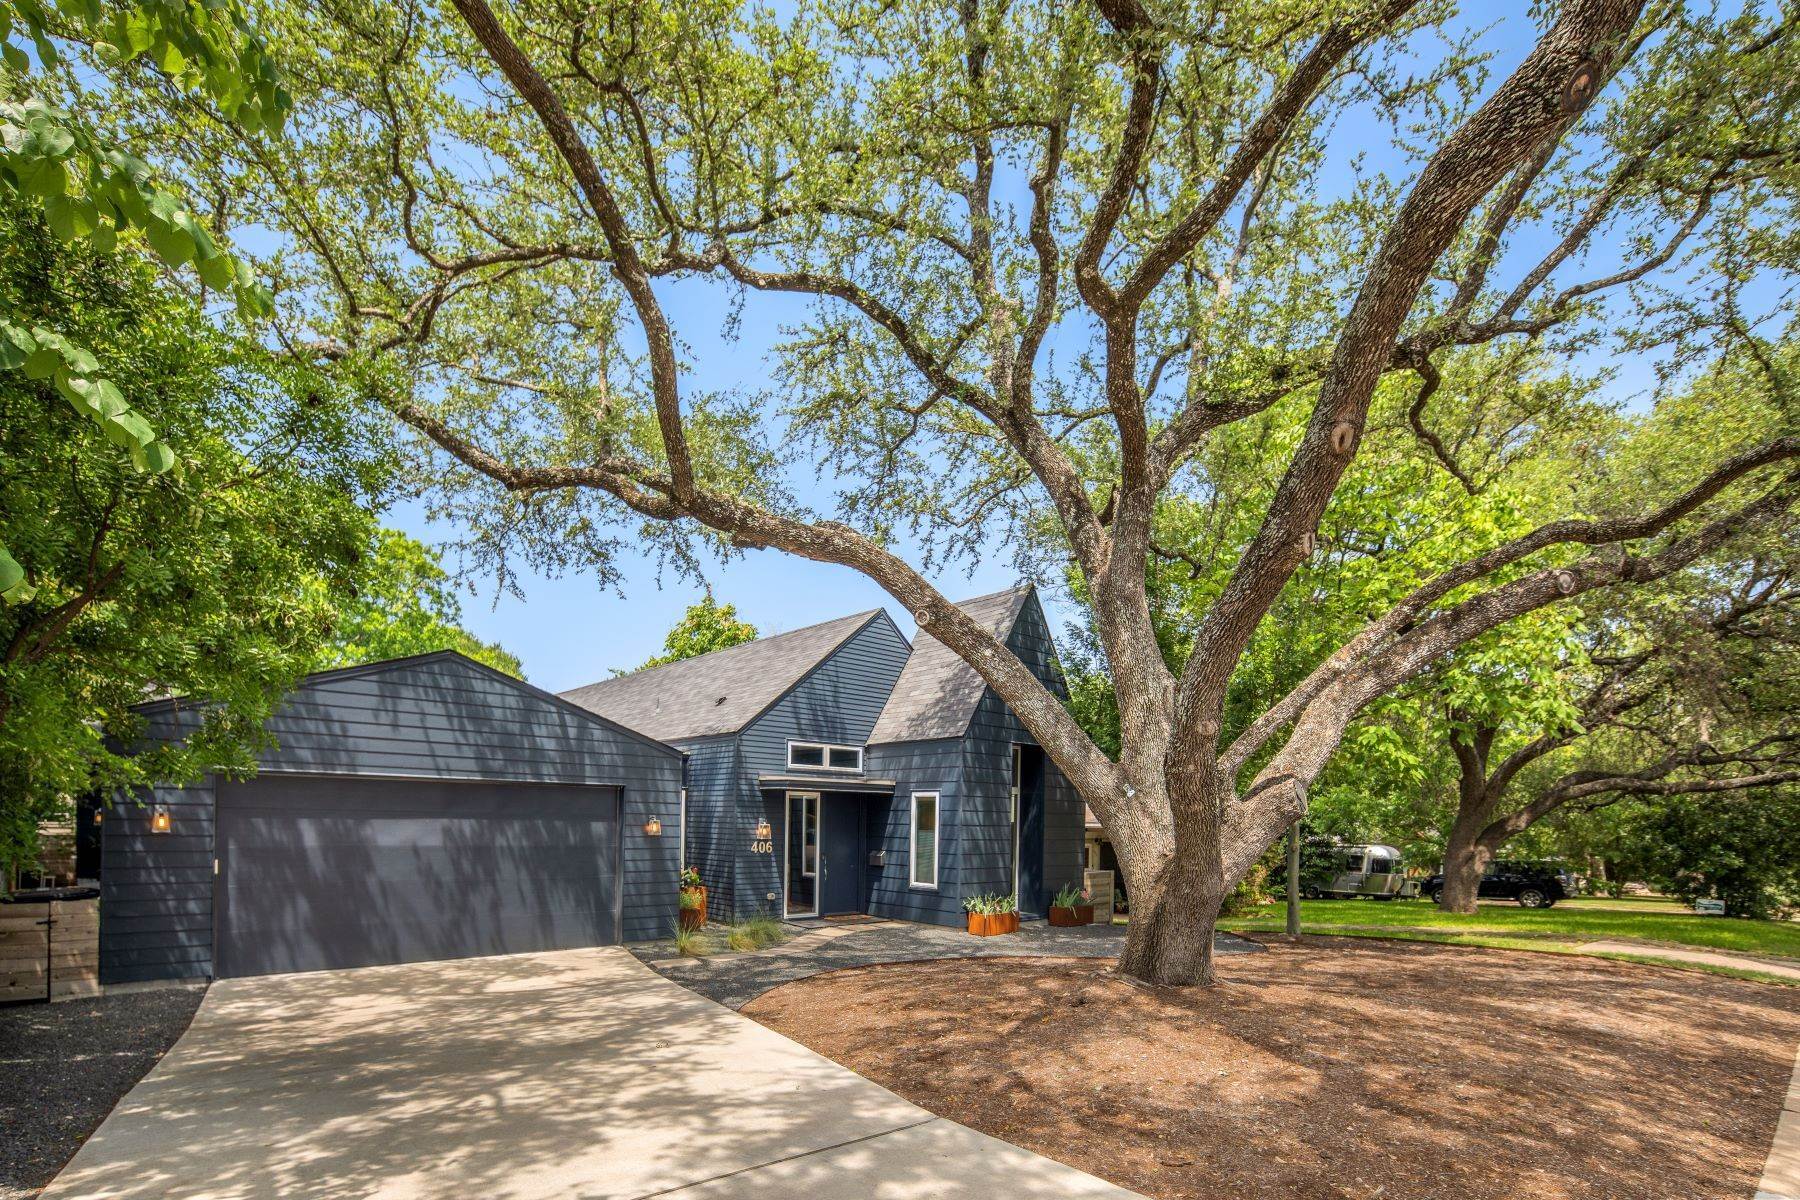 Single Family Homes for Sale at South Austin Contemporary 406 South Park Drive Austin, Texas 78704 United States